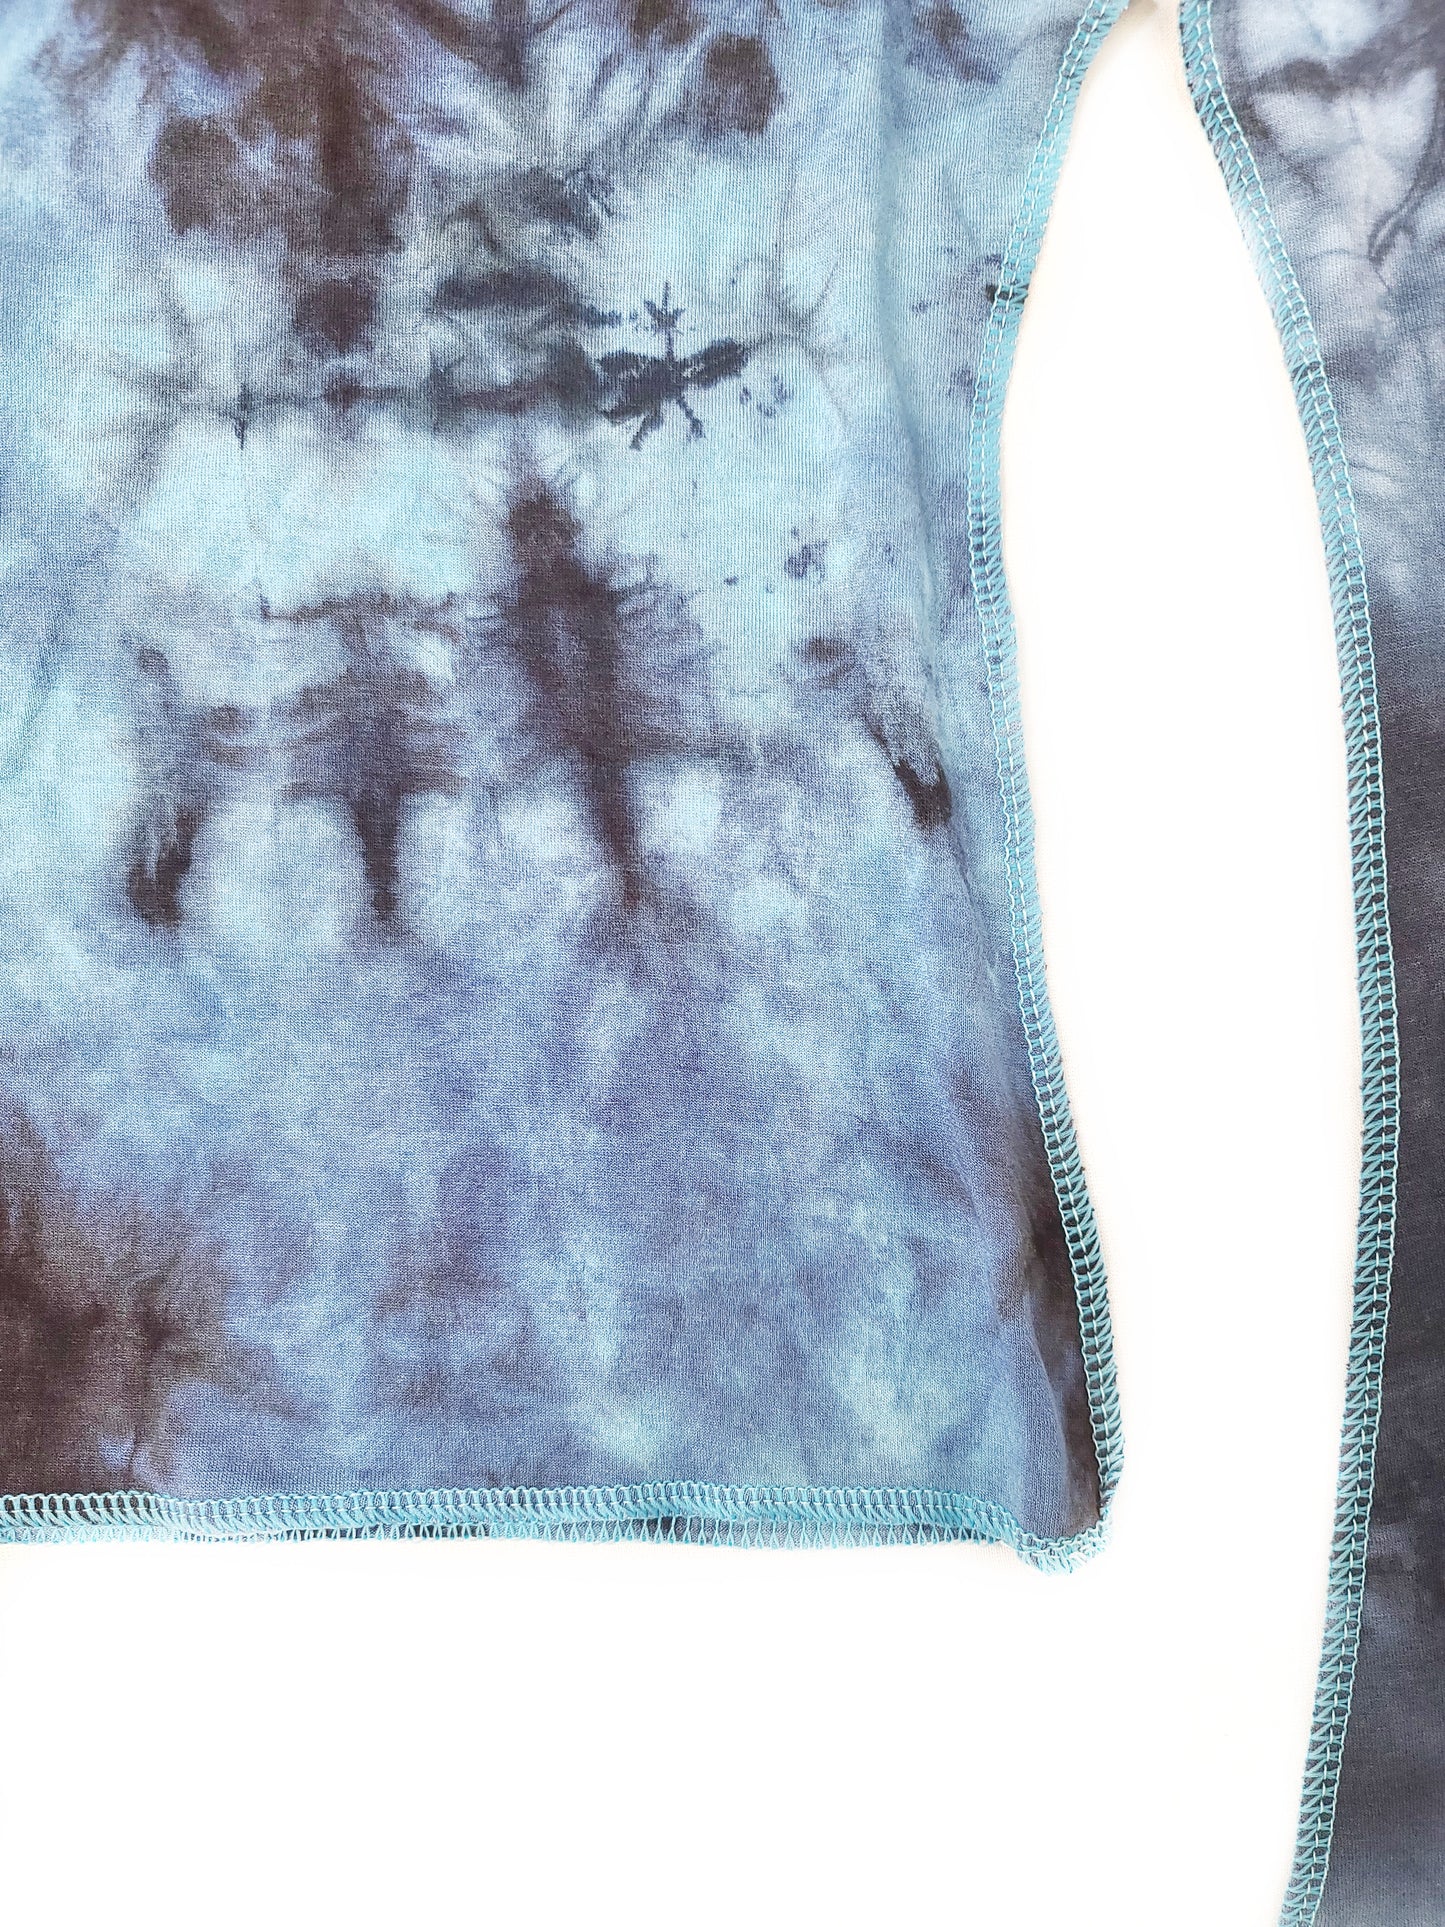 Top 90s grunge tie and dye